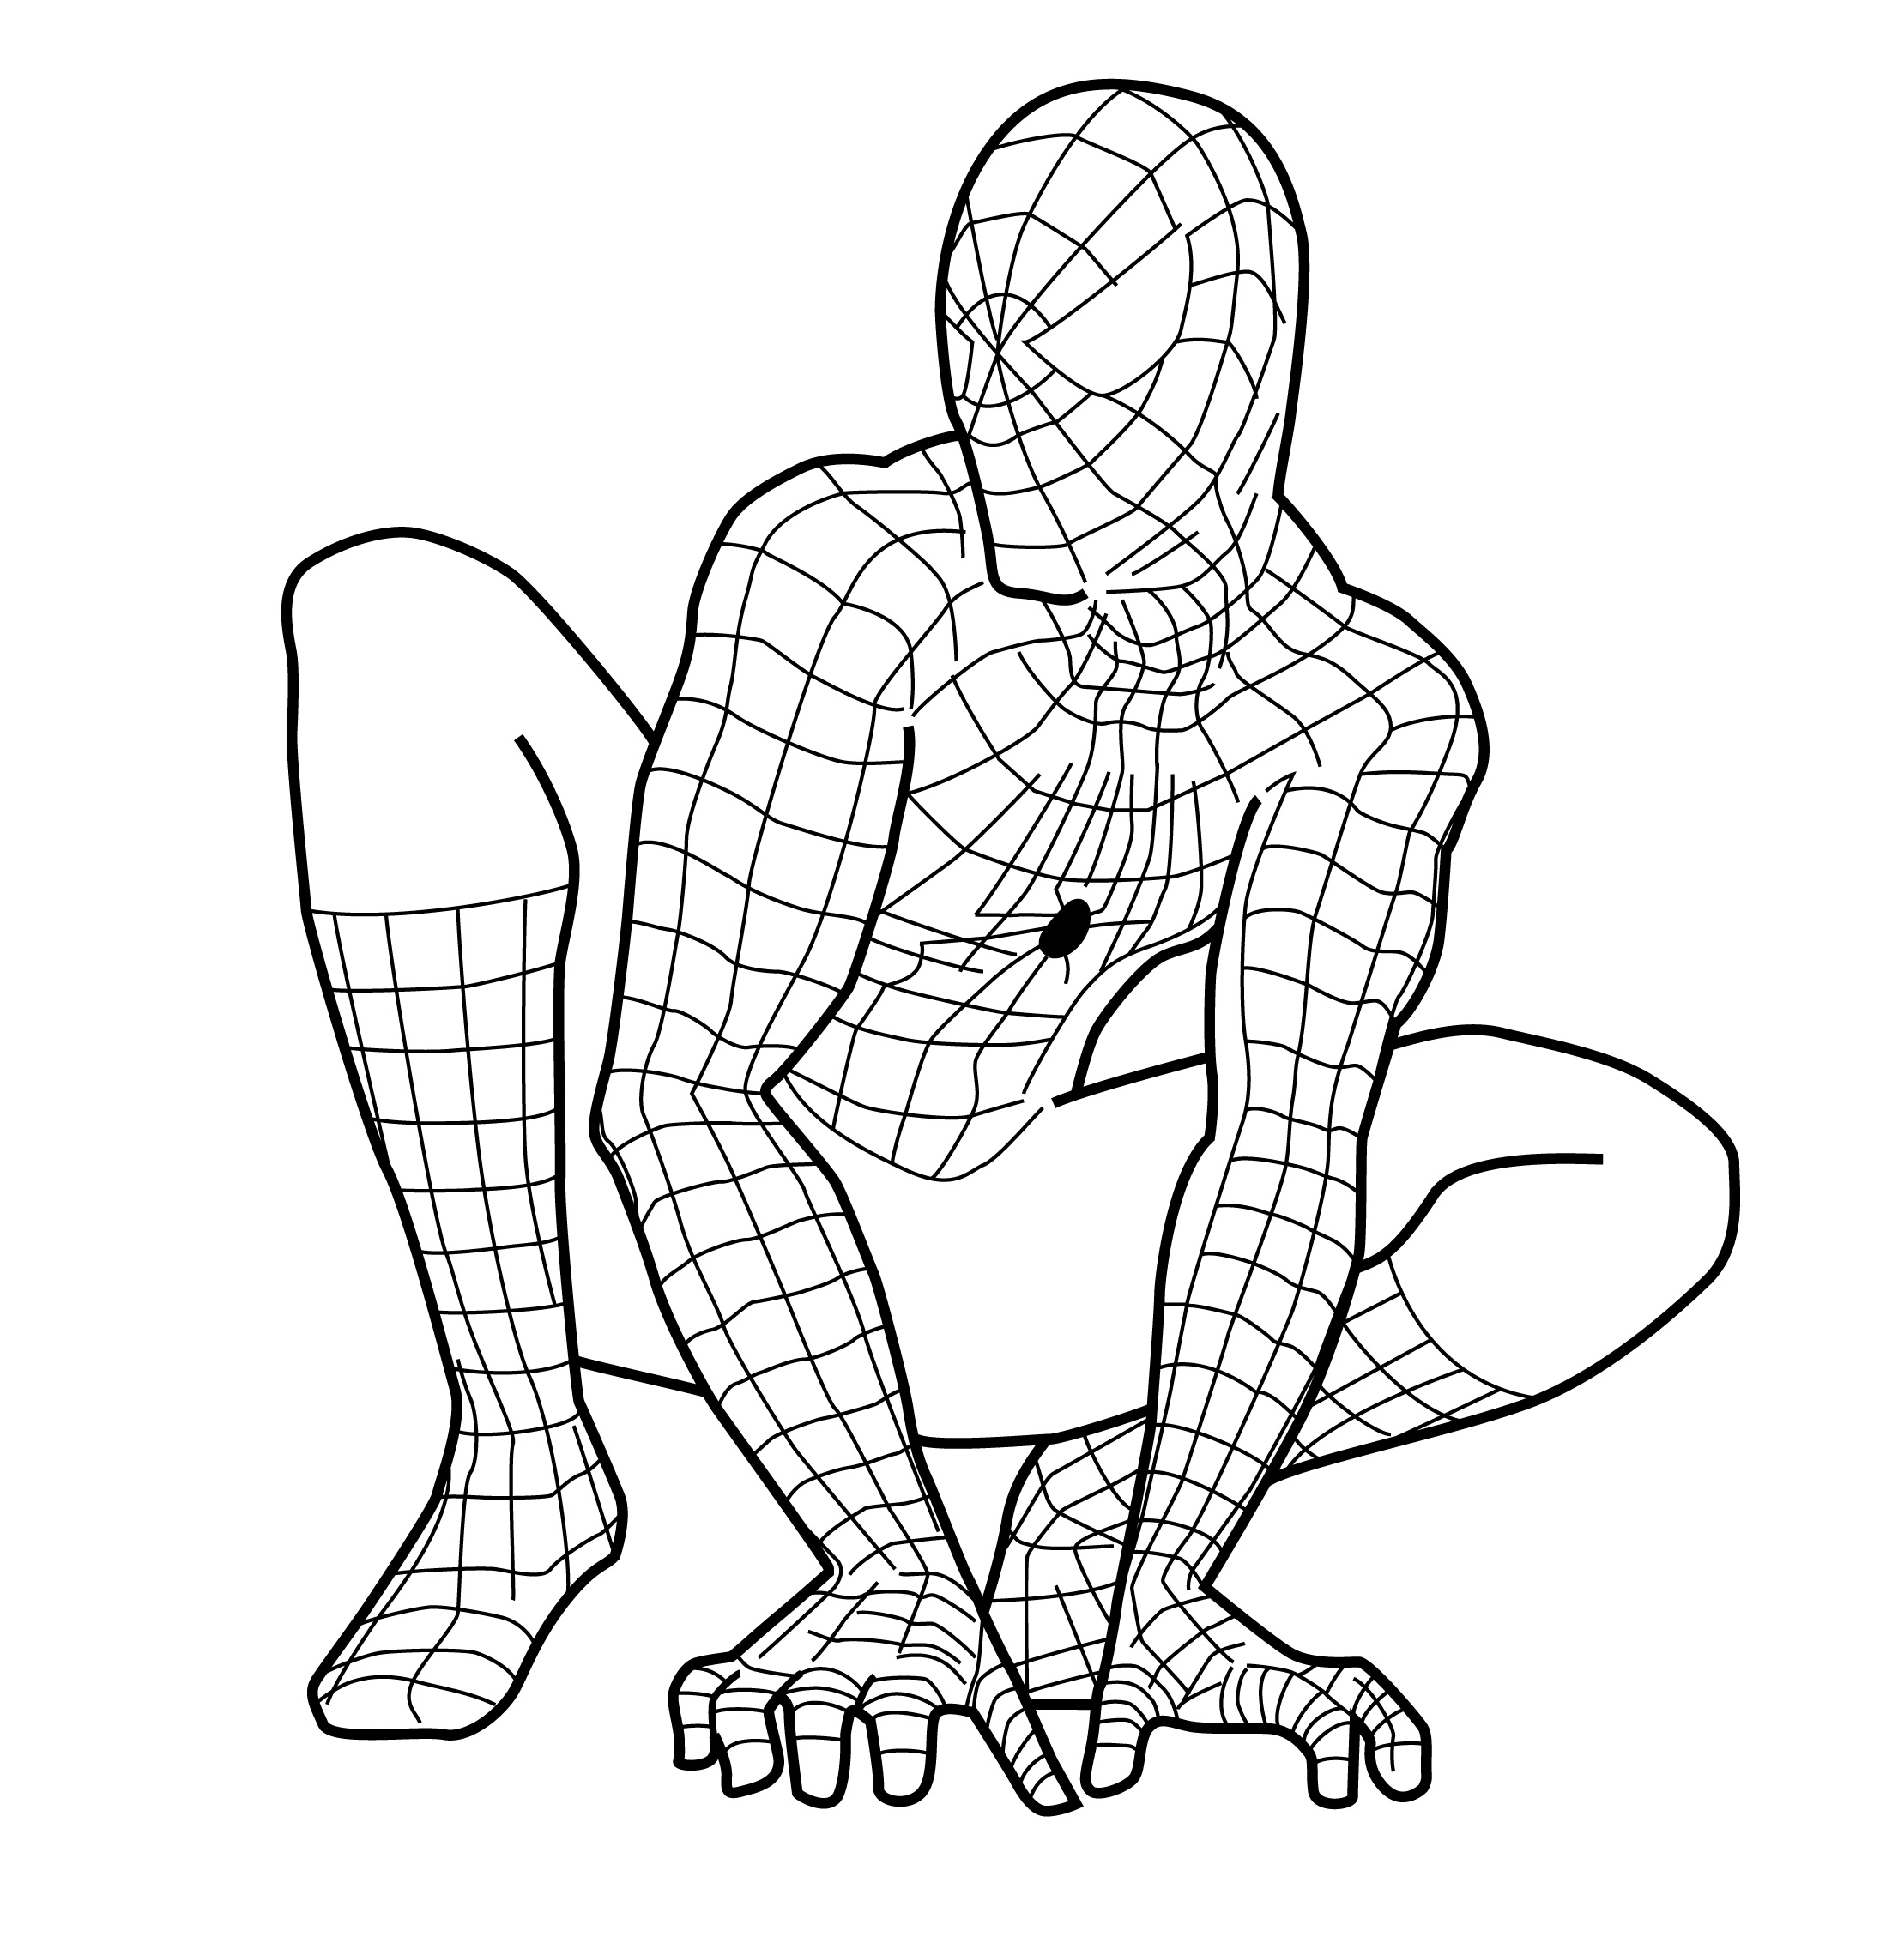 Free Printable Spiderman Coloring Pages For Kids Cartoon spiderman coloring pages at getdrawings free download. free printable spiderman coloring pages